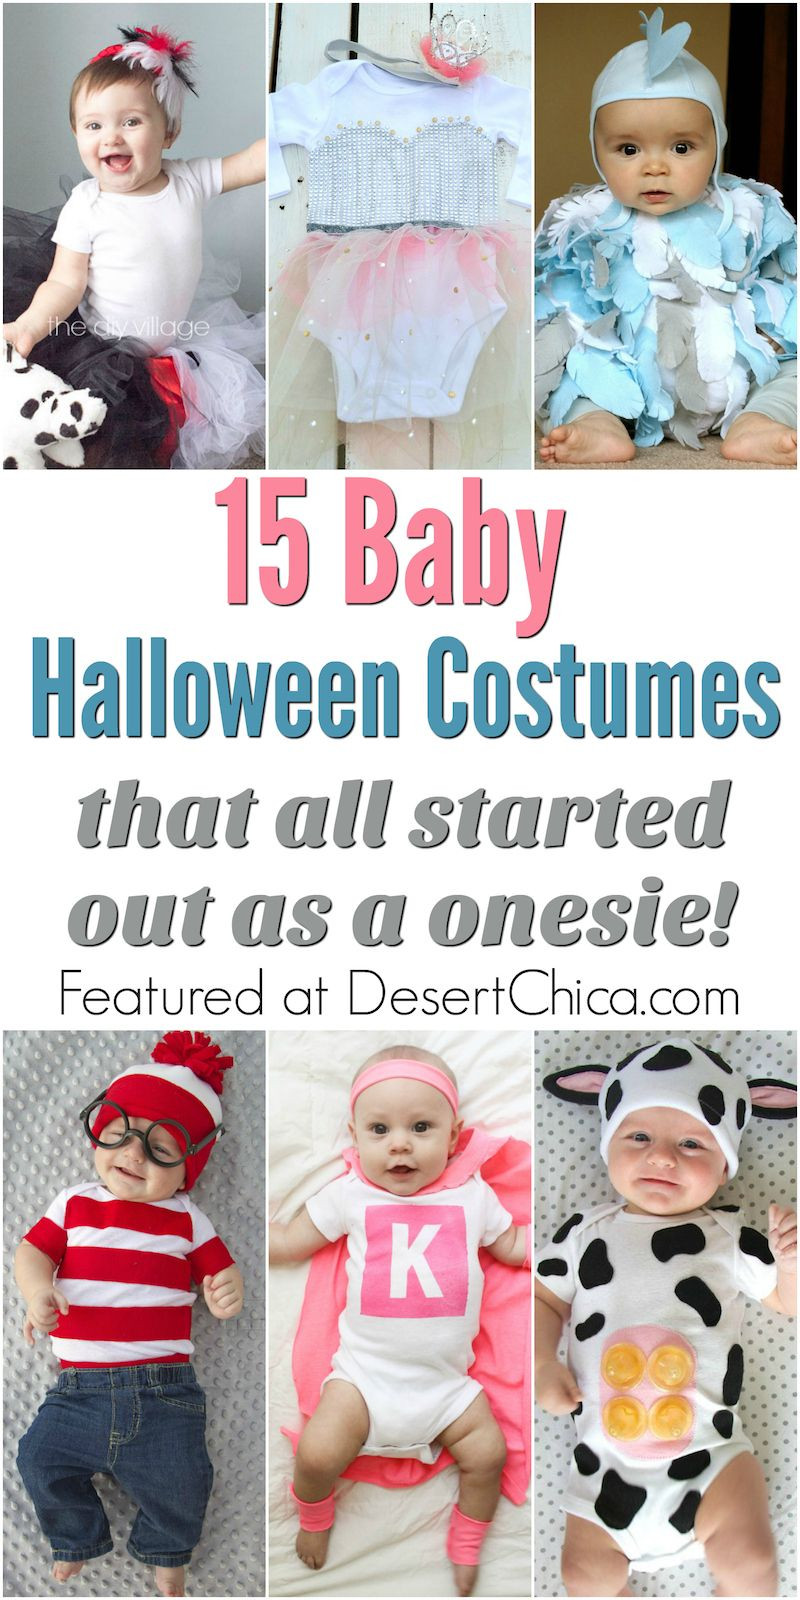 DIY Baby Girl Costume
 Adorable Baby Costumes from a esie